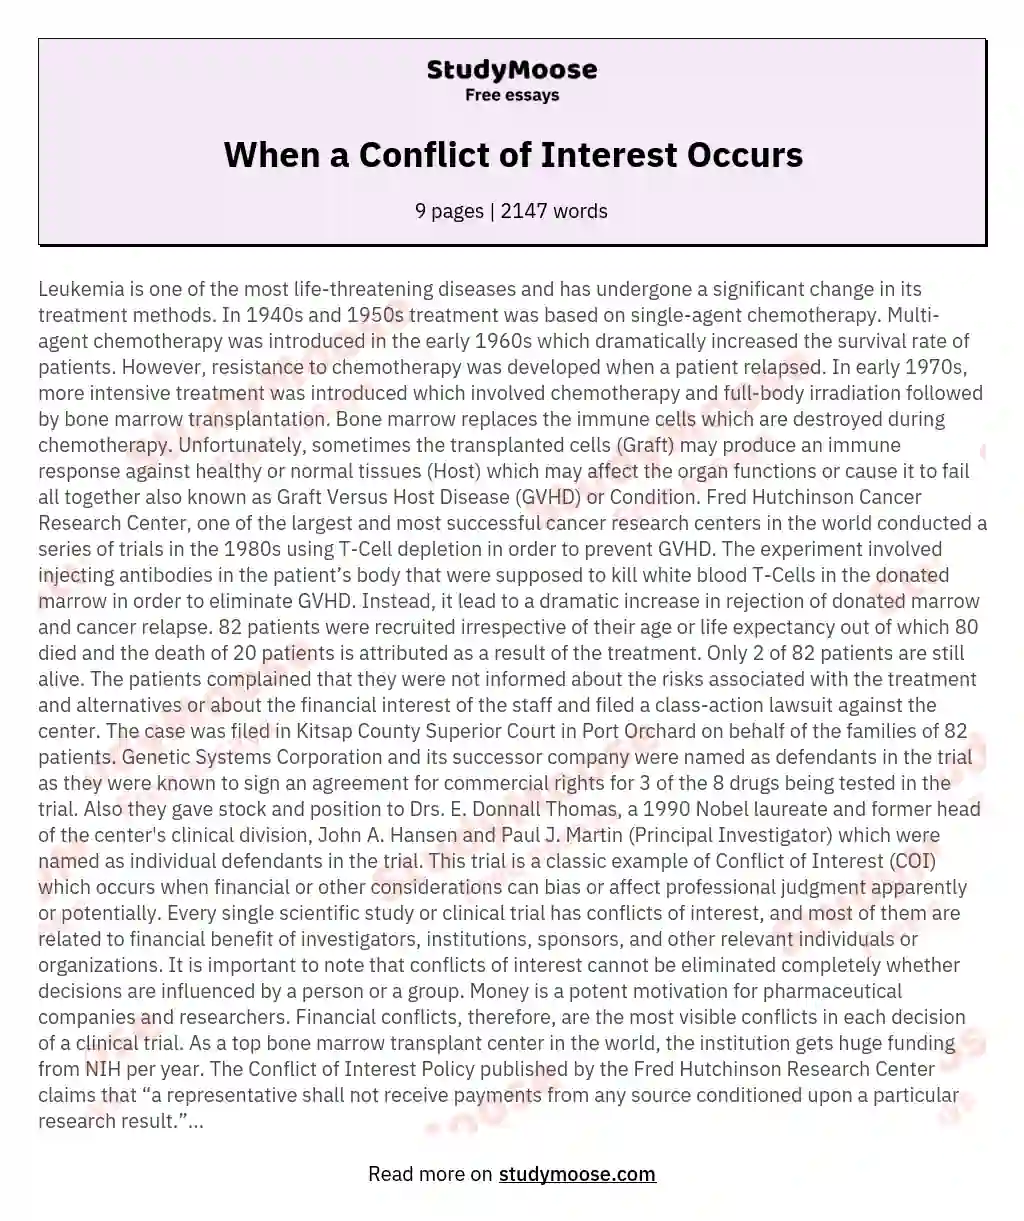 When a Conflict of Interest Occurs essay